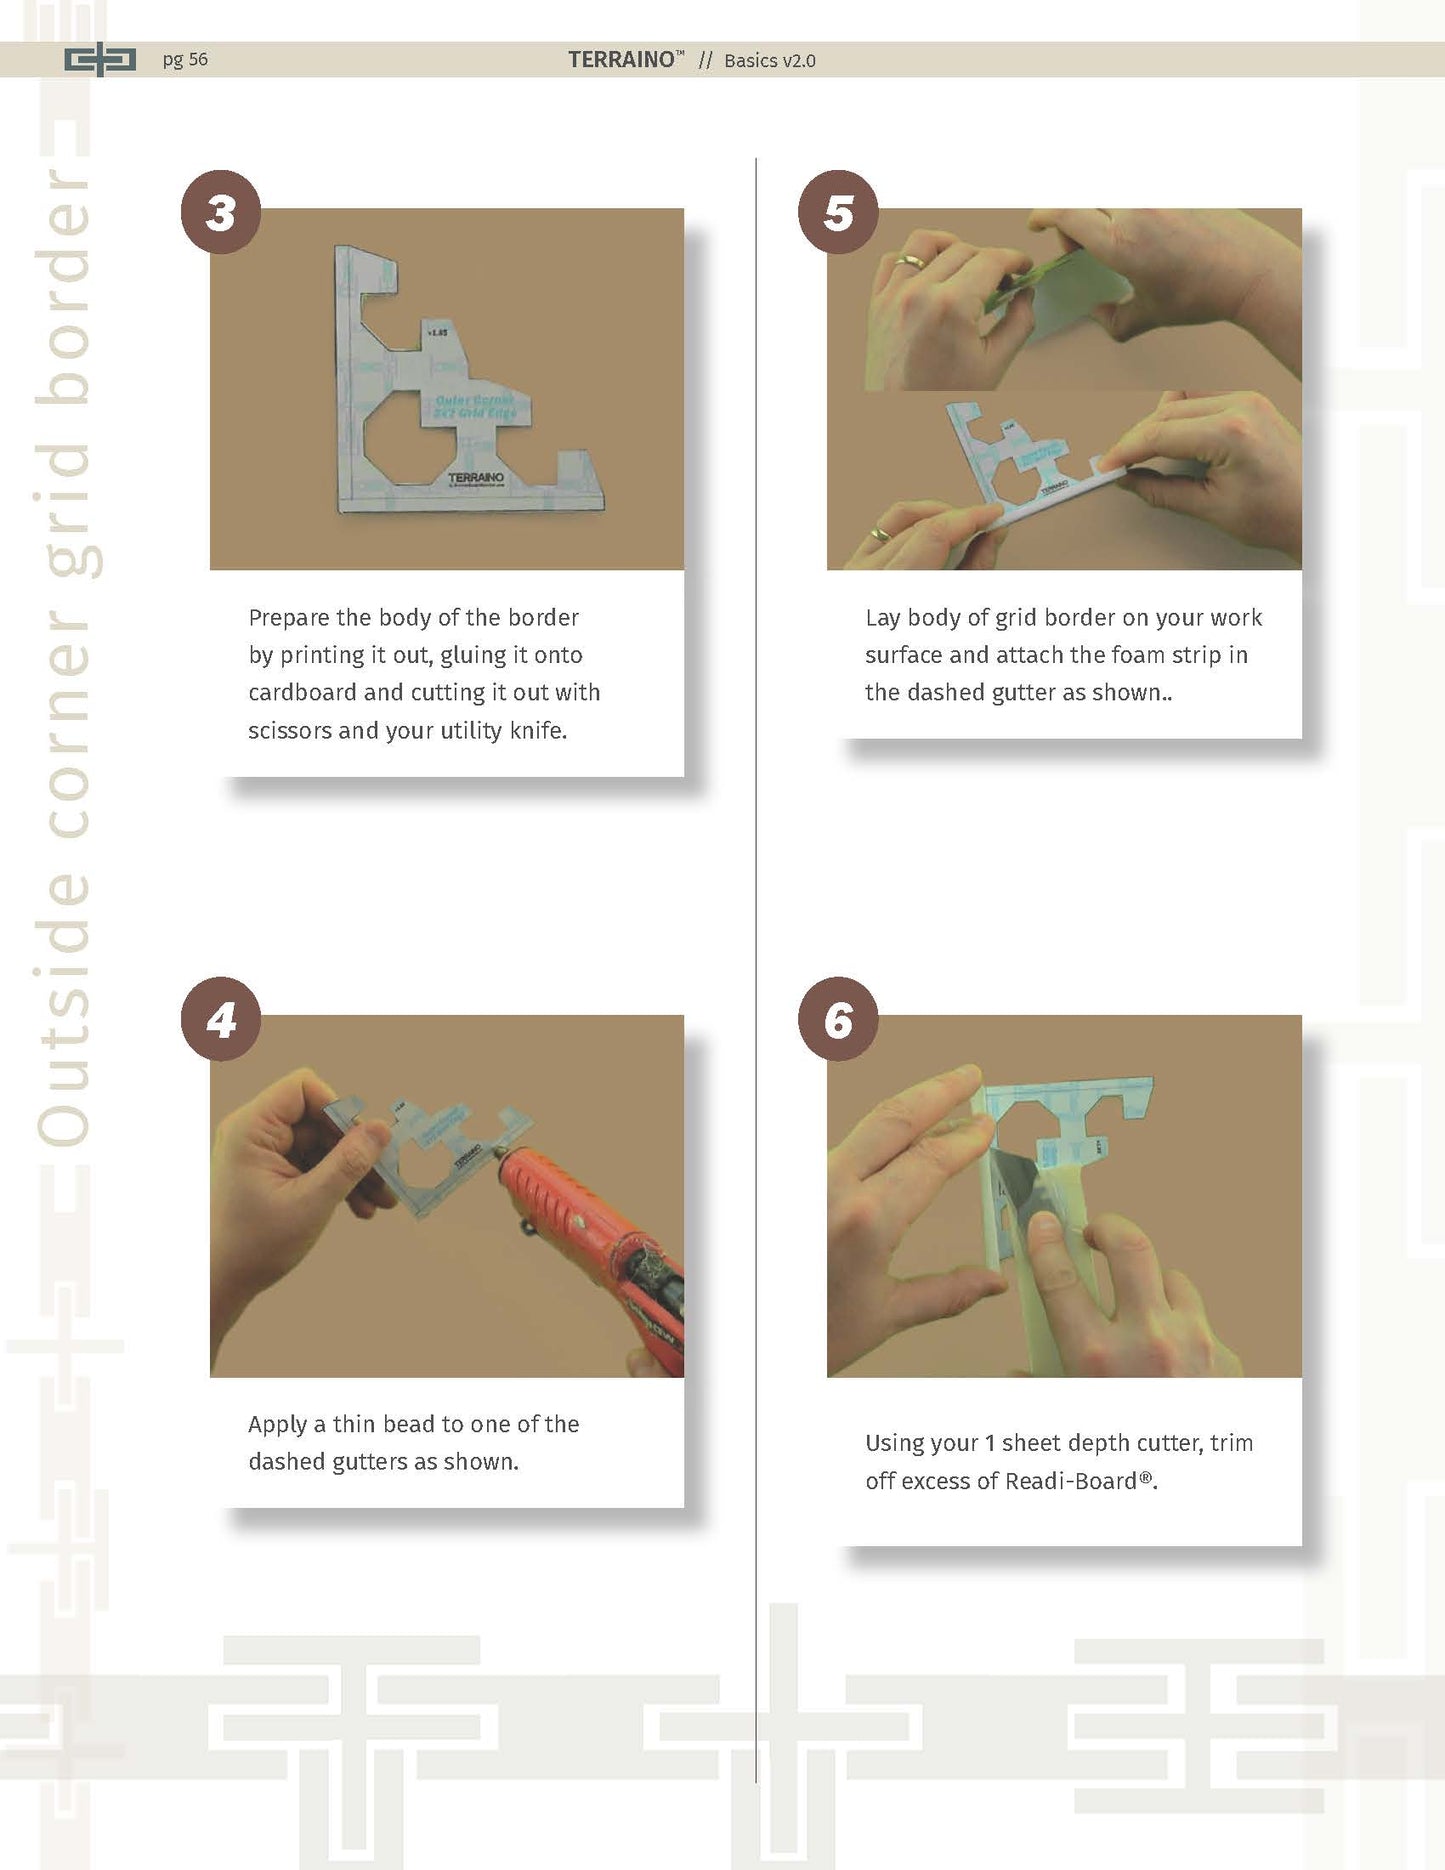 Step by Step instructions take you through making all the Modular Floor tile pieces.